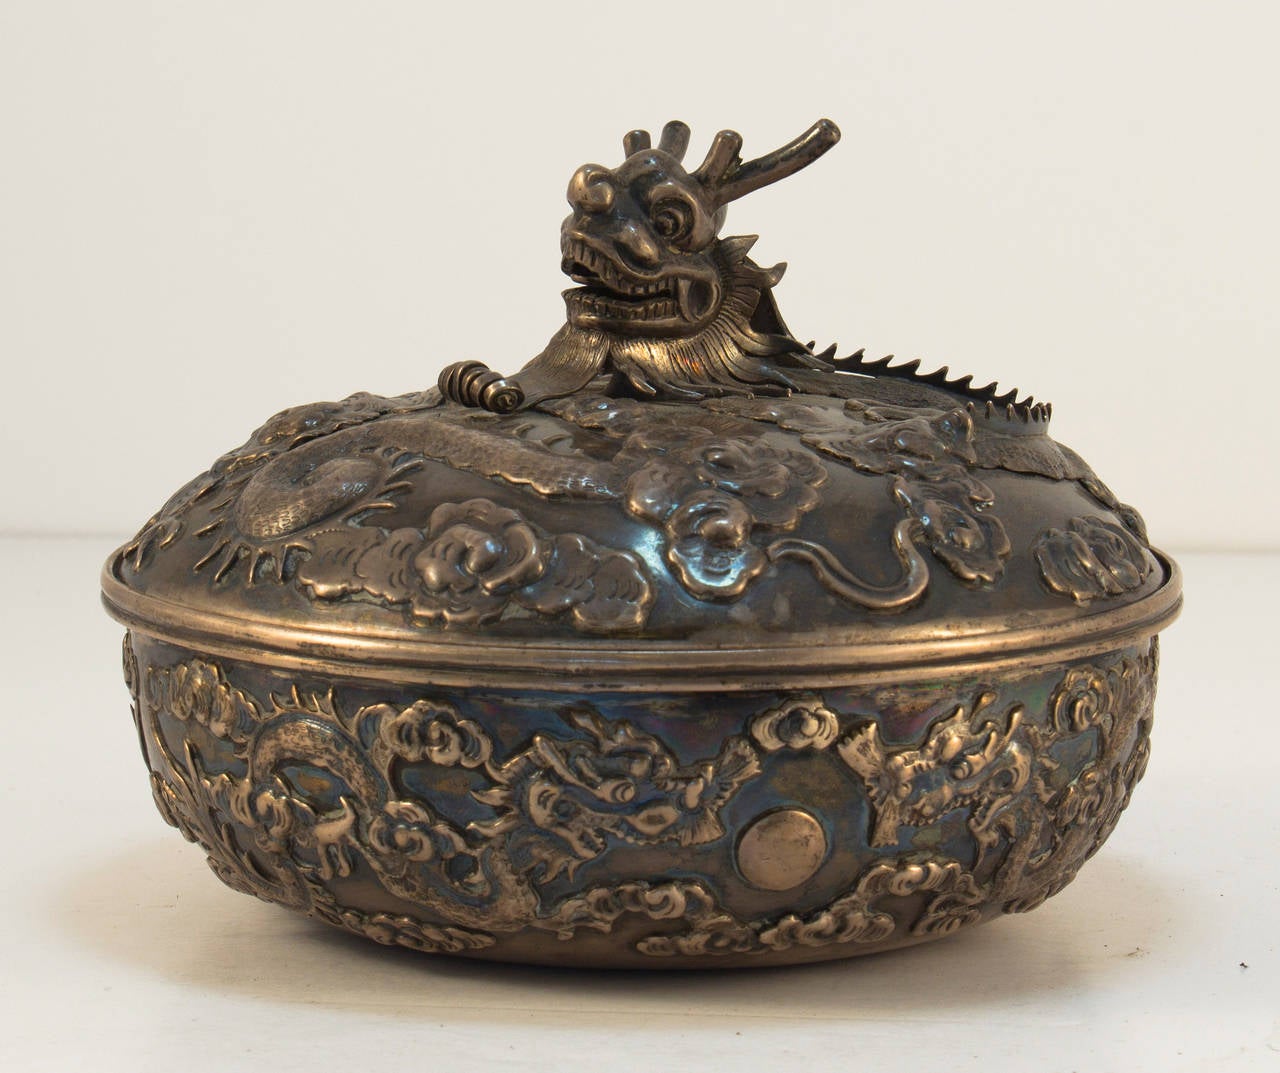 Chinese export silver canister, Hong Kong, late 19th century, Wang Hing & Co., makers, also bearing Glasgow import mark for 1895, round, chased, embossed, the sides with writhing addorsed dragons reaching to the jewel of immortality amidst the